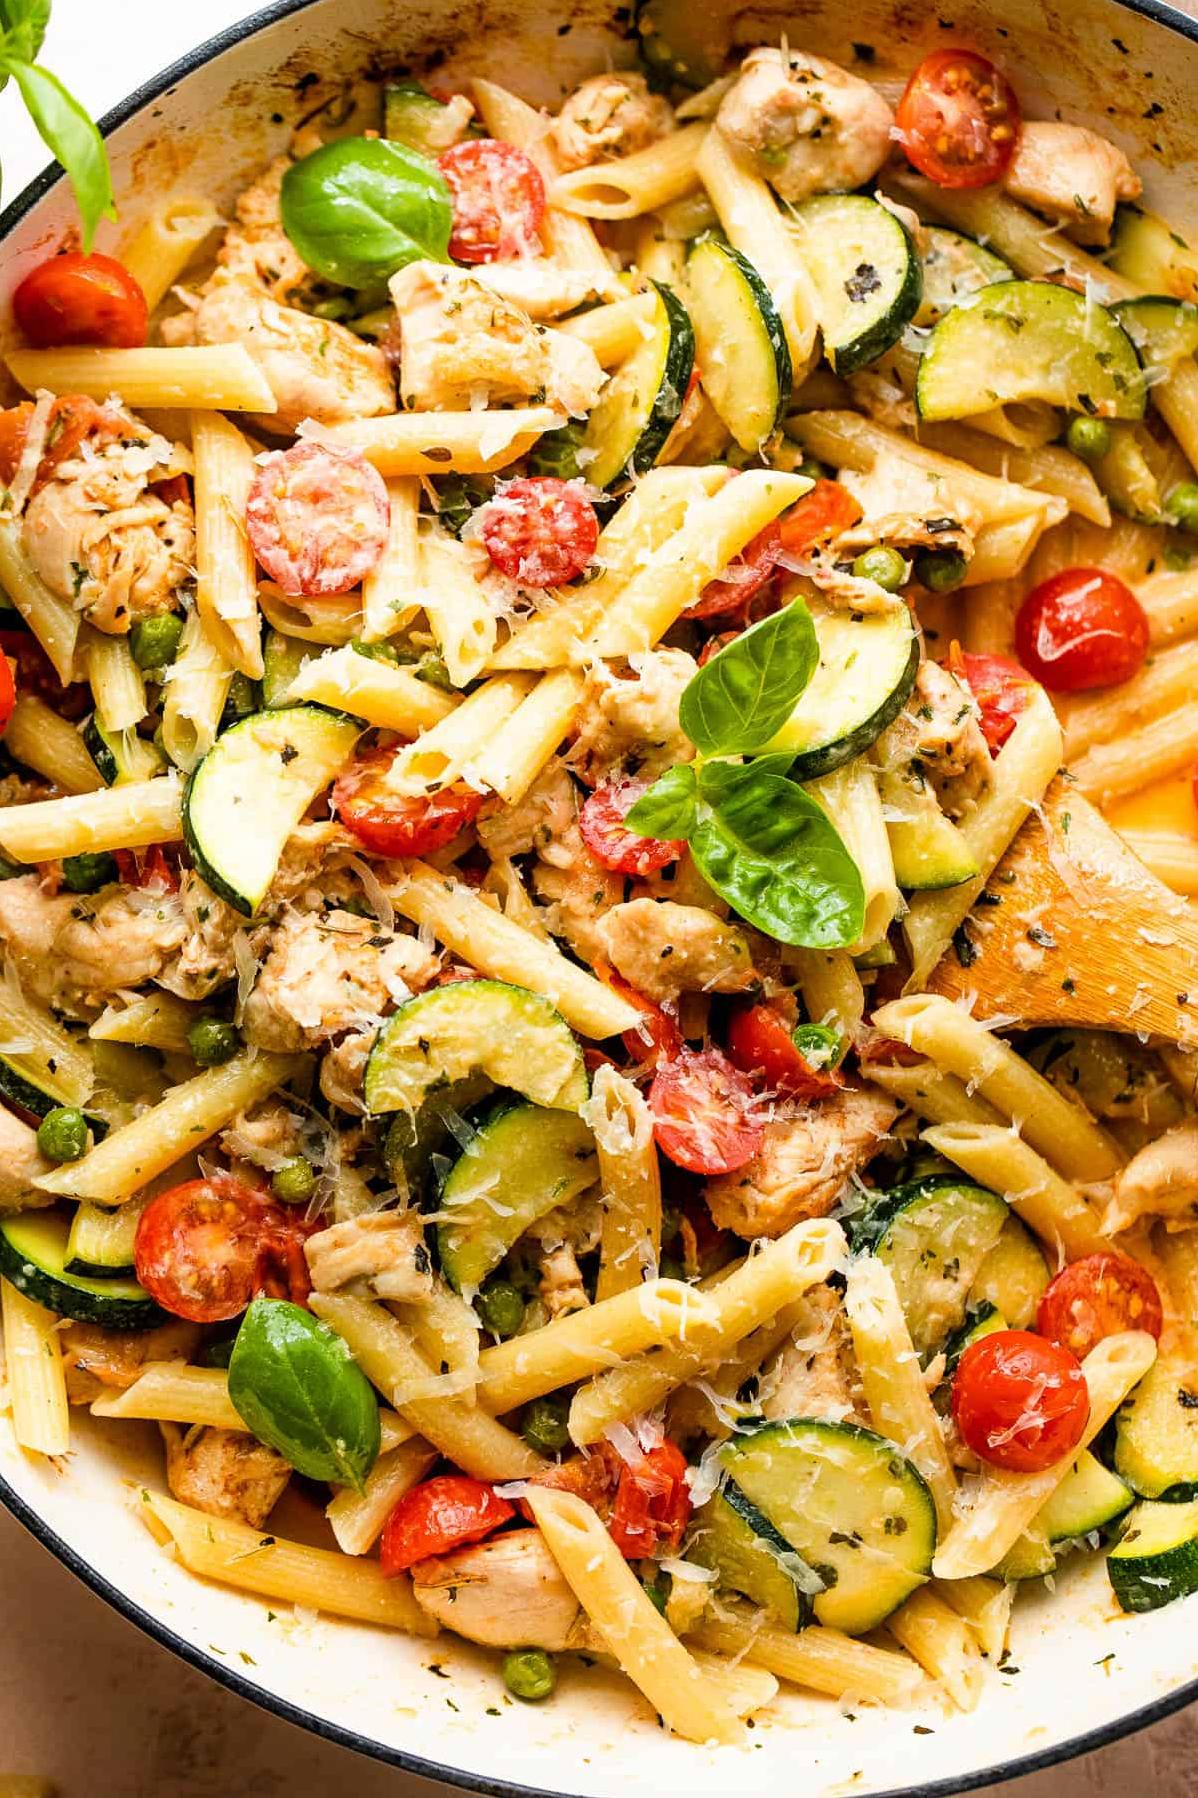  A gluten-free, dairy-free pasta dish that's good for your soul AND your belly.